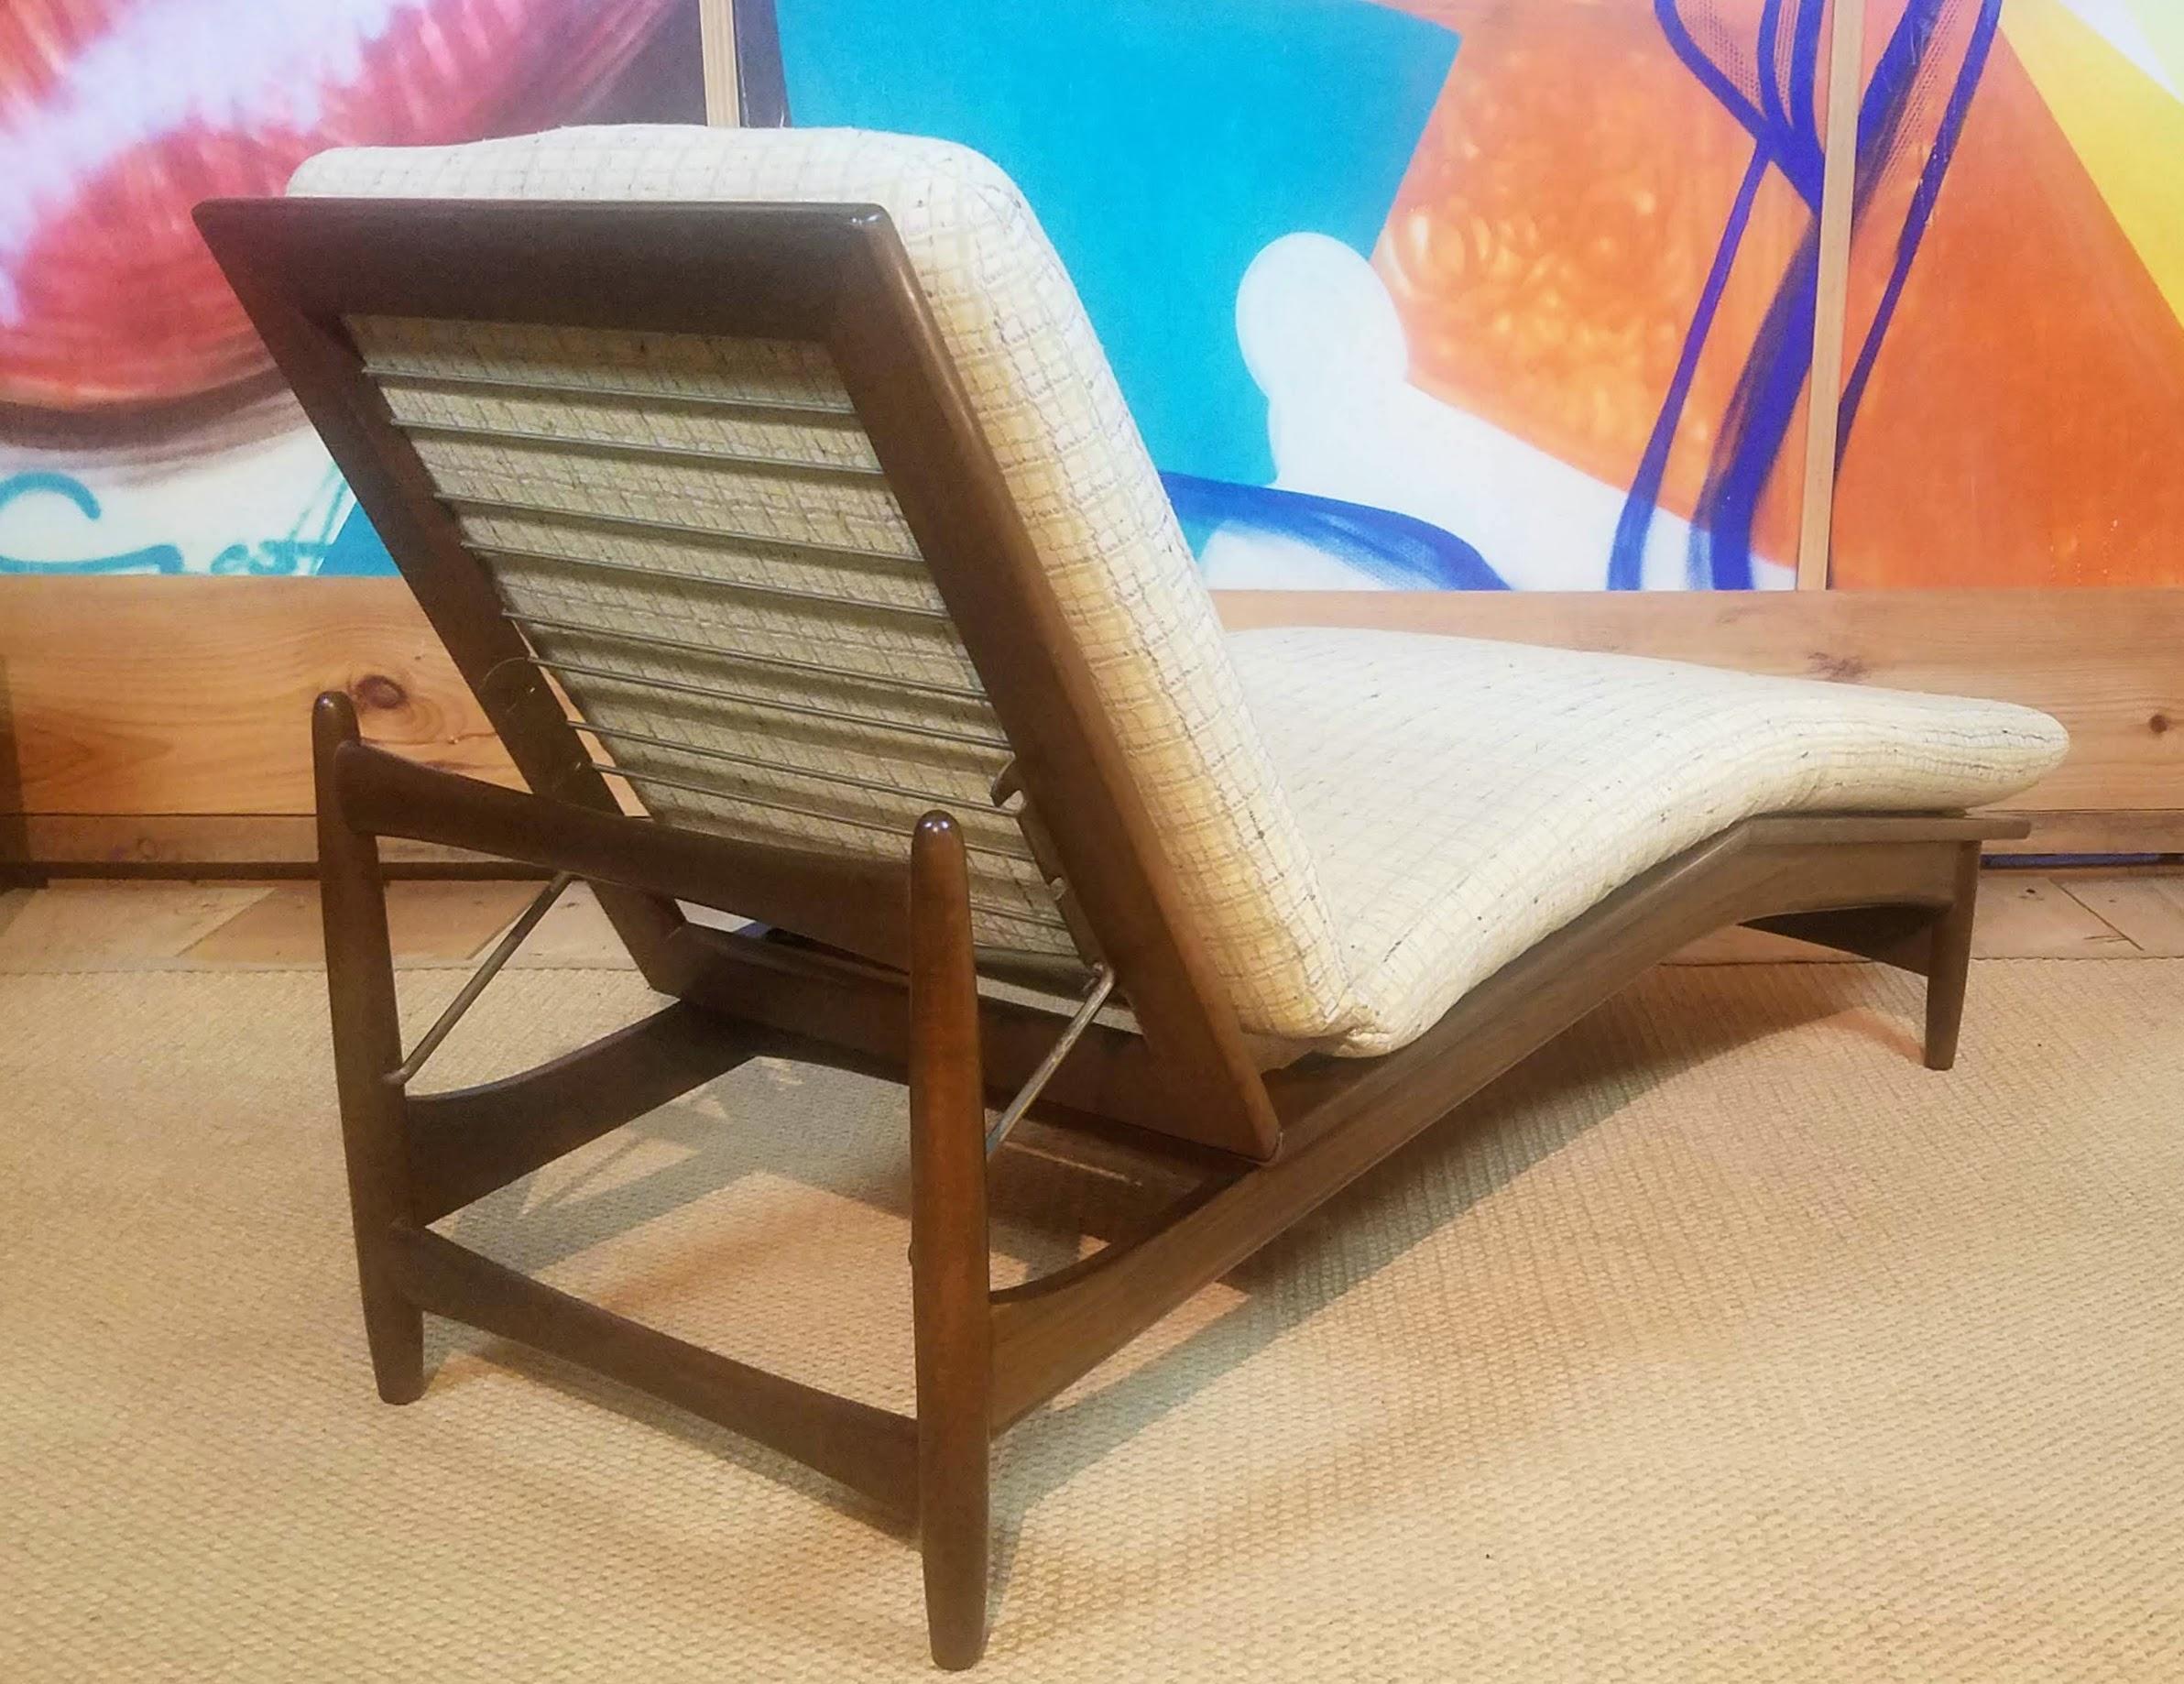 Ib Kofod-Larsen designed modern Beech chaise lounge with an adjustable three position back manufactured in Denmark for Selig circa 1959..
The original finish has been brightened up and what I think is the original upholstery is in excellent vintage